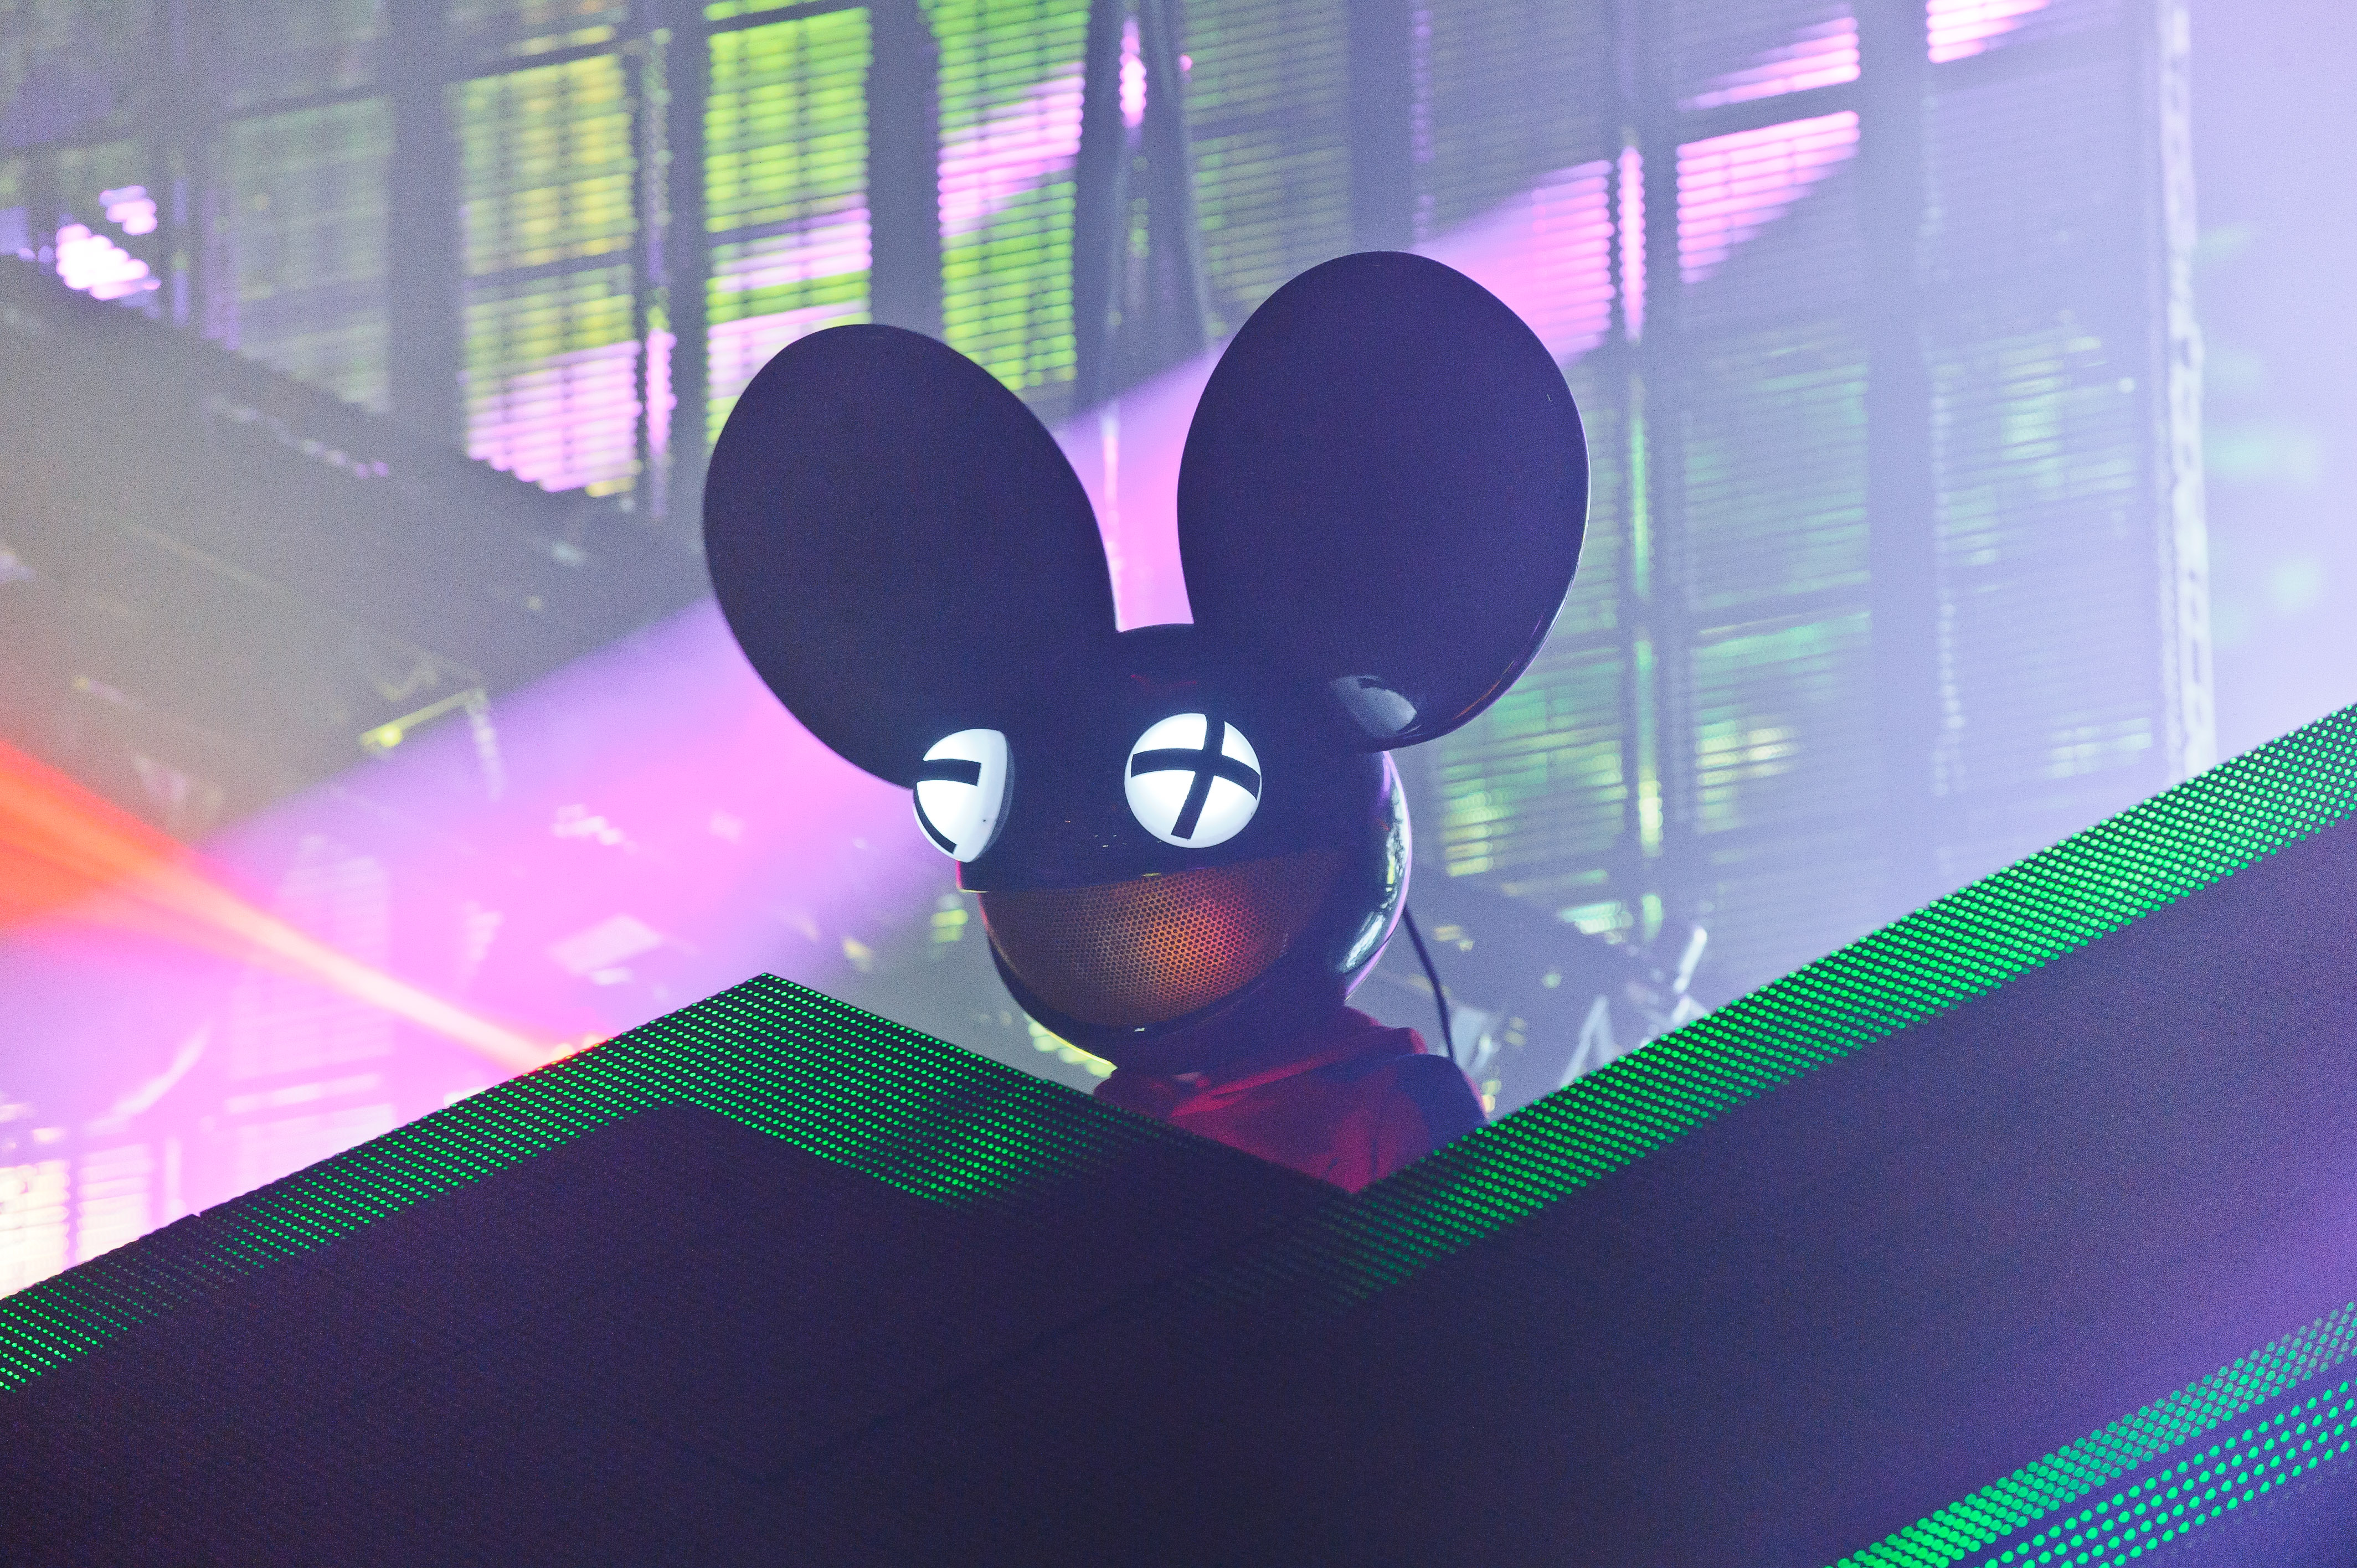 Deadmau5 performs on stage at South West Four Festival 2014 on Aug. 24, 2014, in London (Joseph Okpako—WireImage/Getty Images)